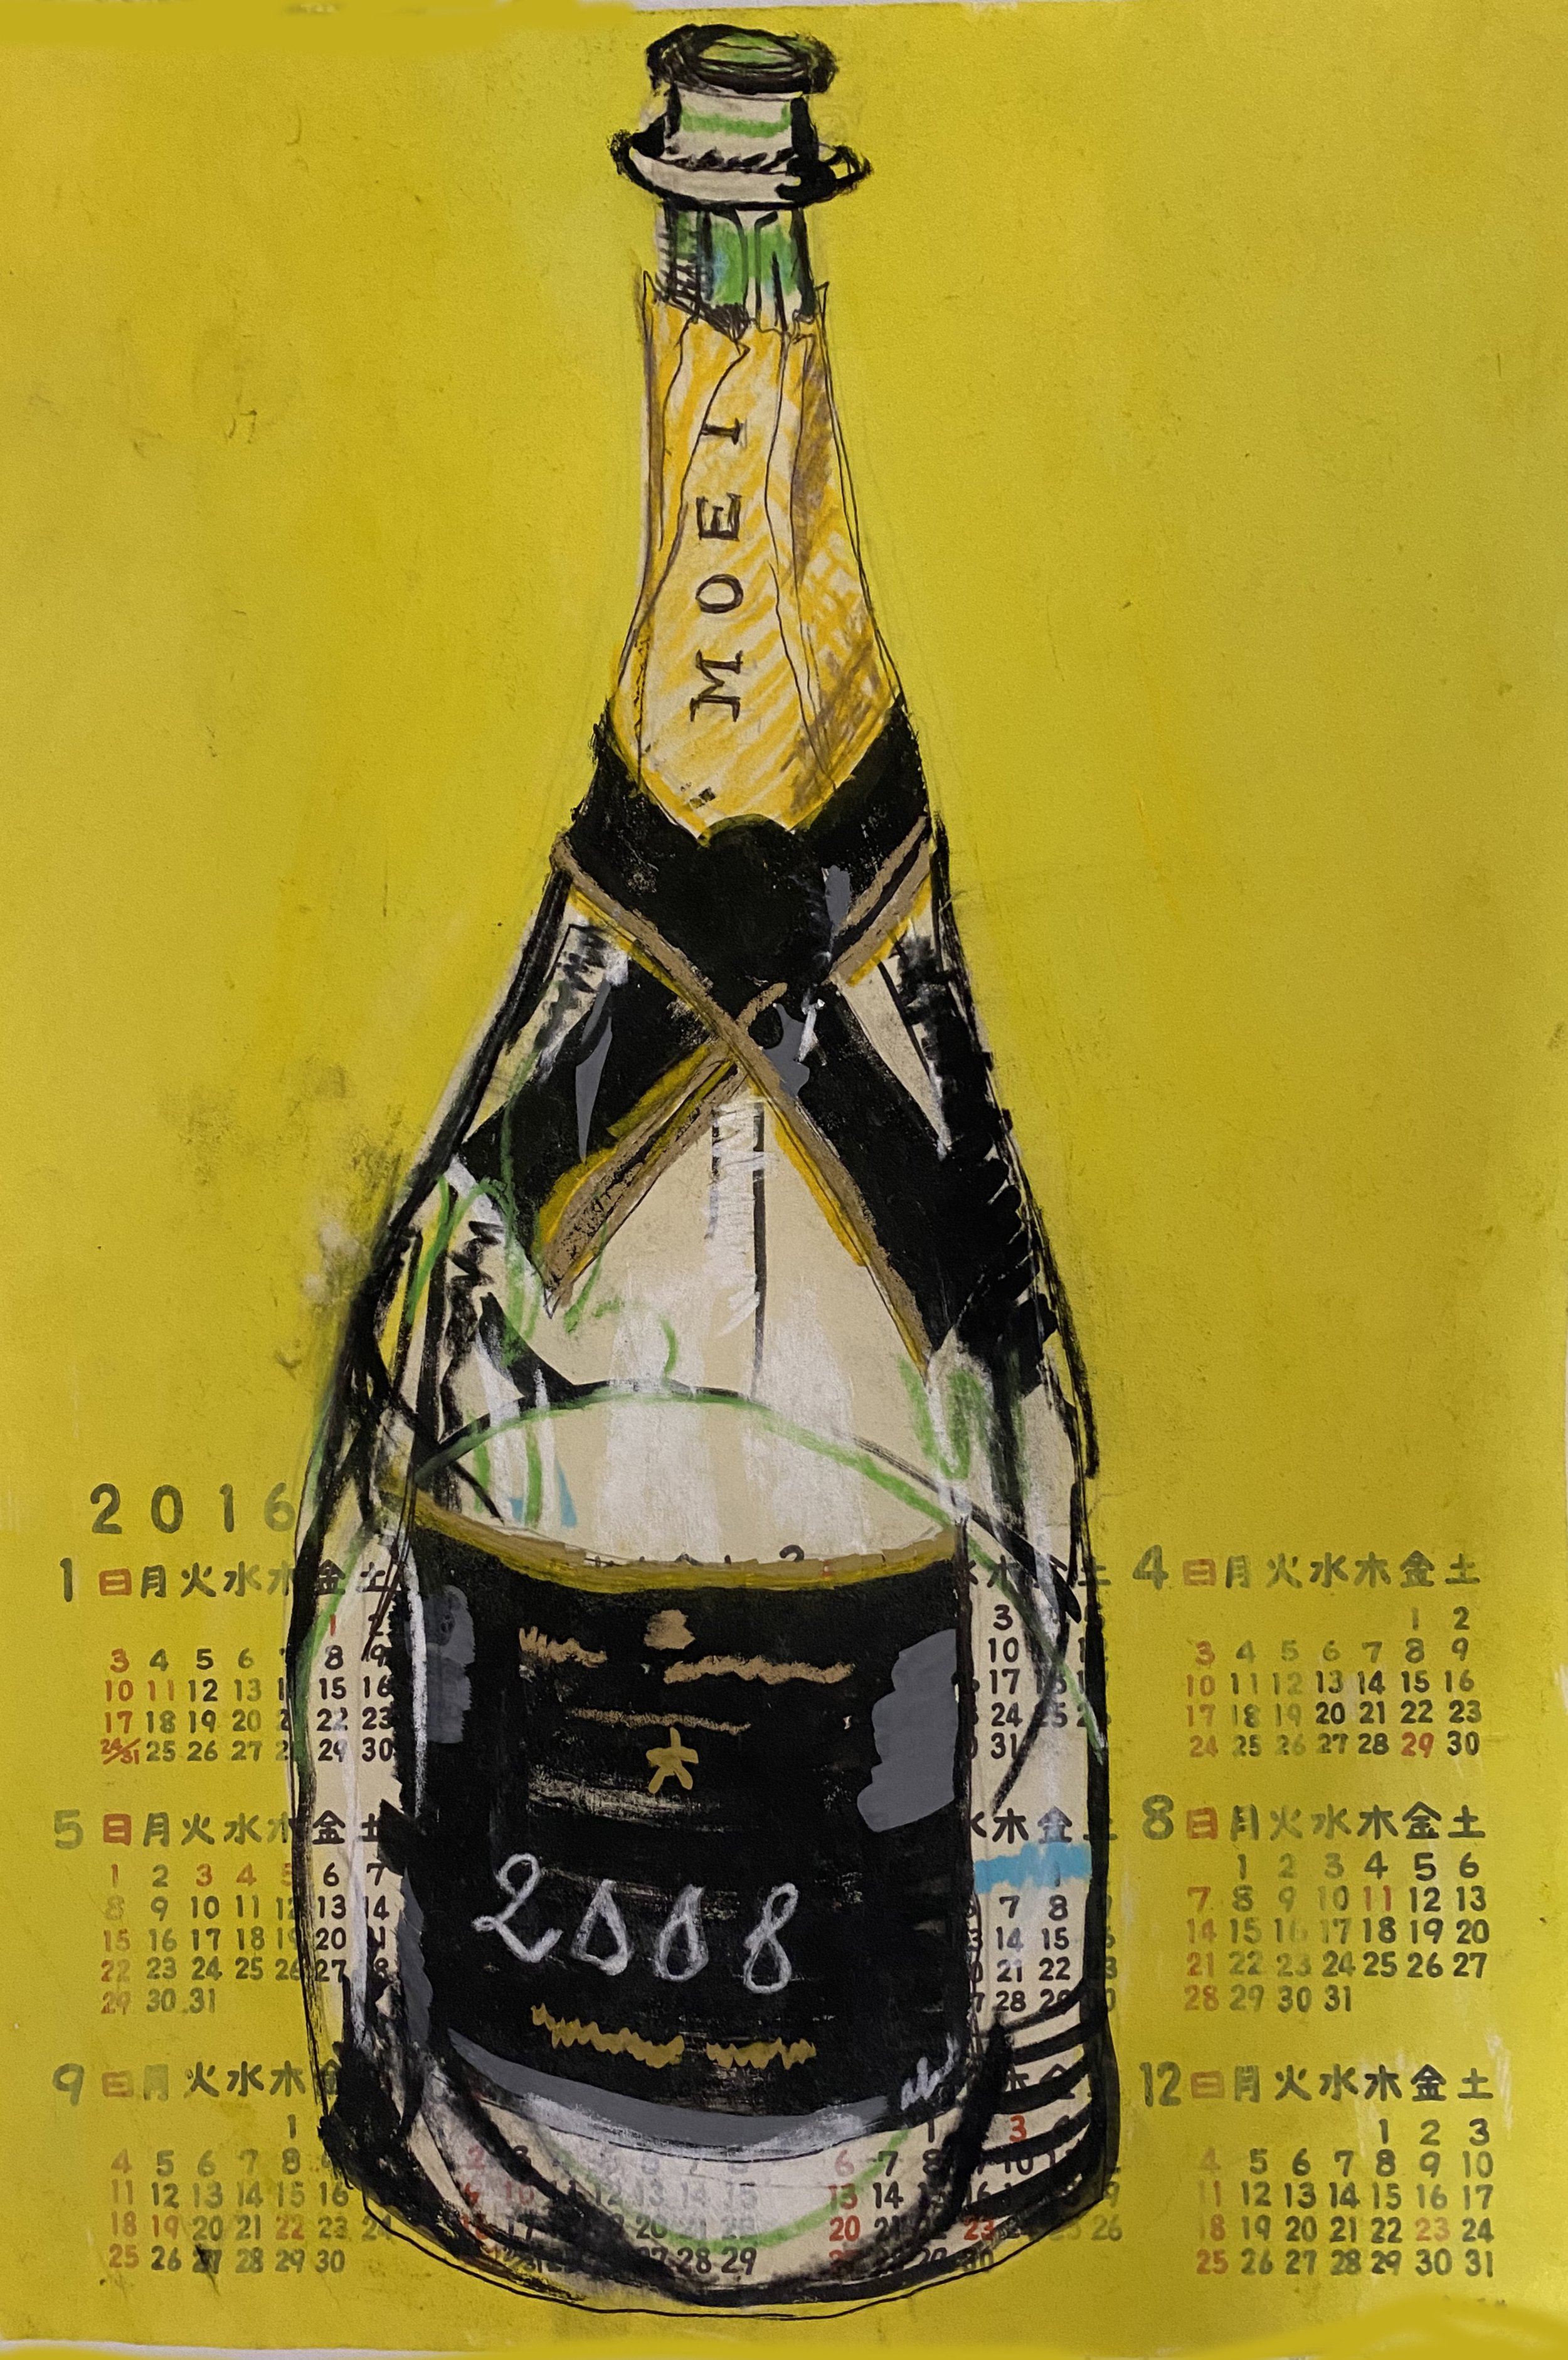 A3_Moet2008_Collage_pastel and ink on Japanese calendar paper.jpg